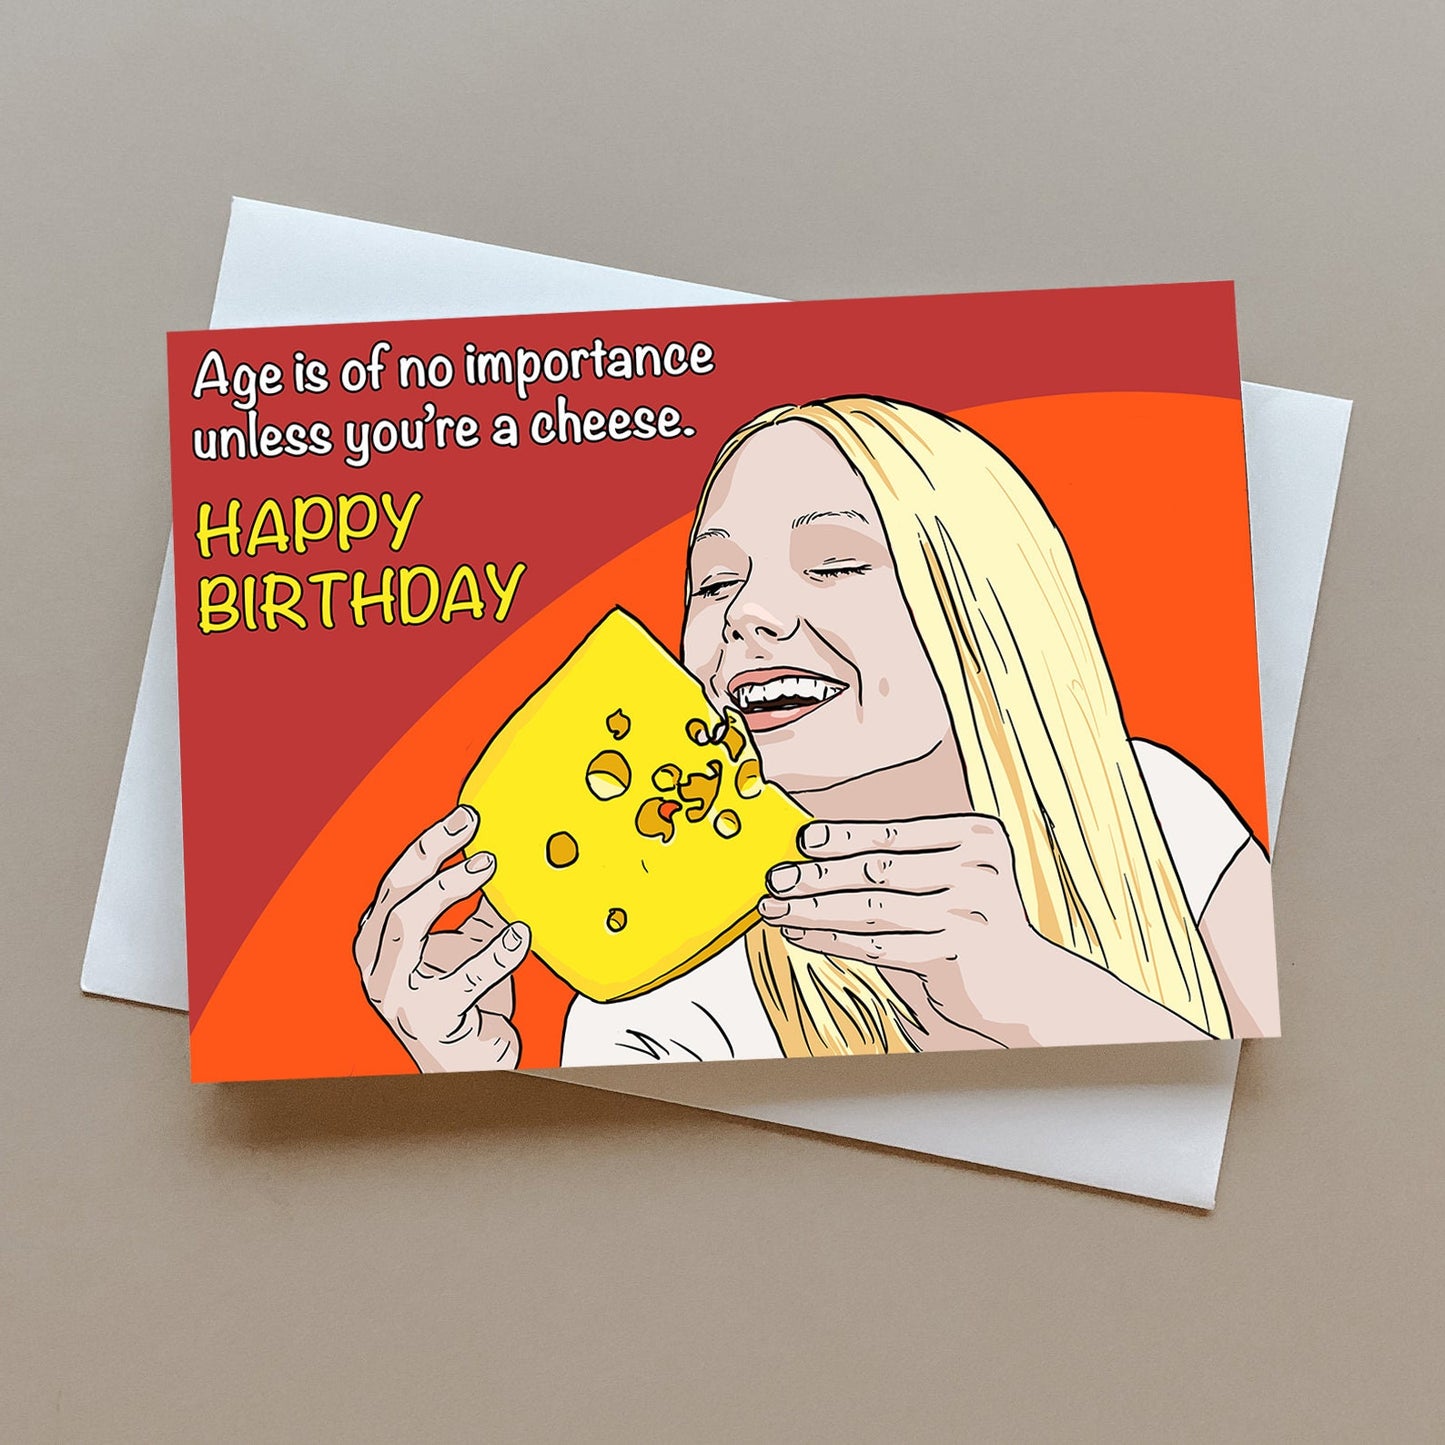 Funny birthday card, "Age is of no importance unless you're a cheese", Cheesy card, humorous card, birthday meme, birthday card, cheese card